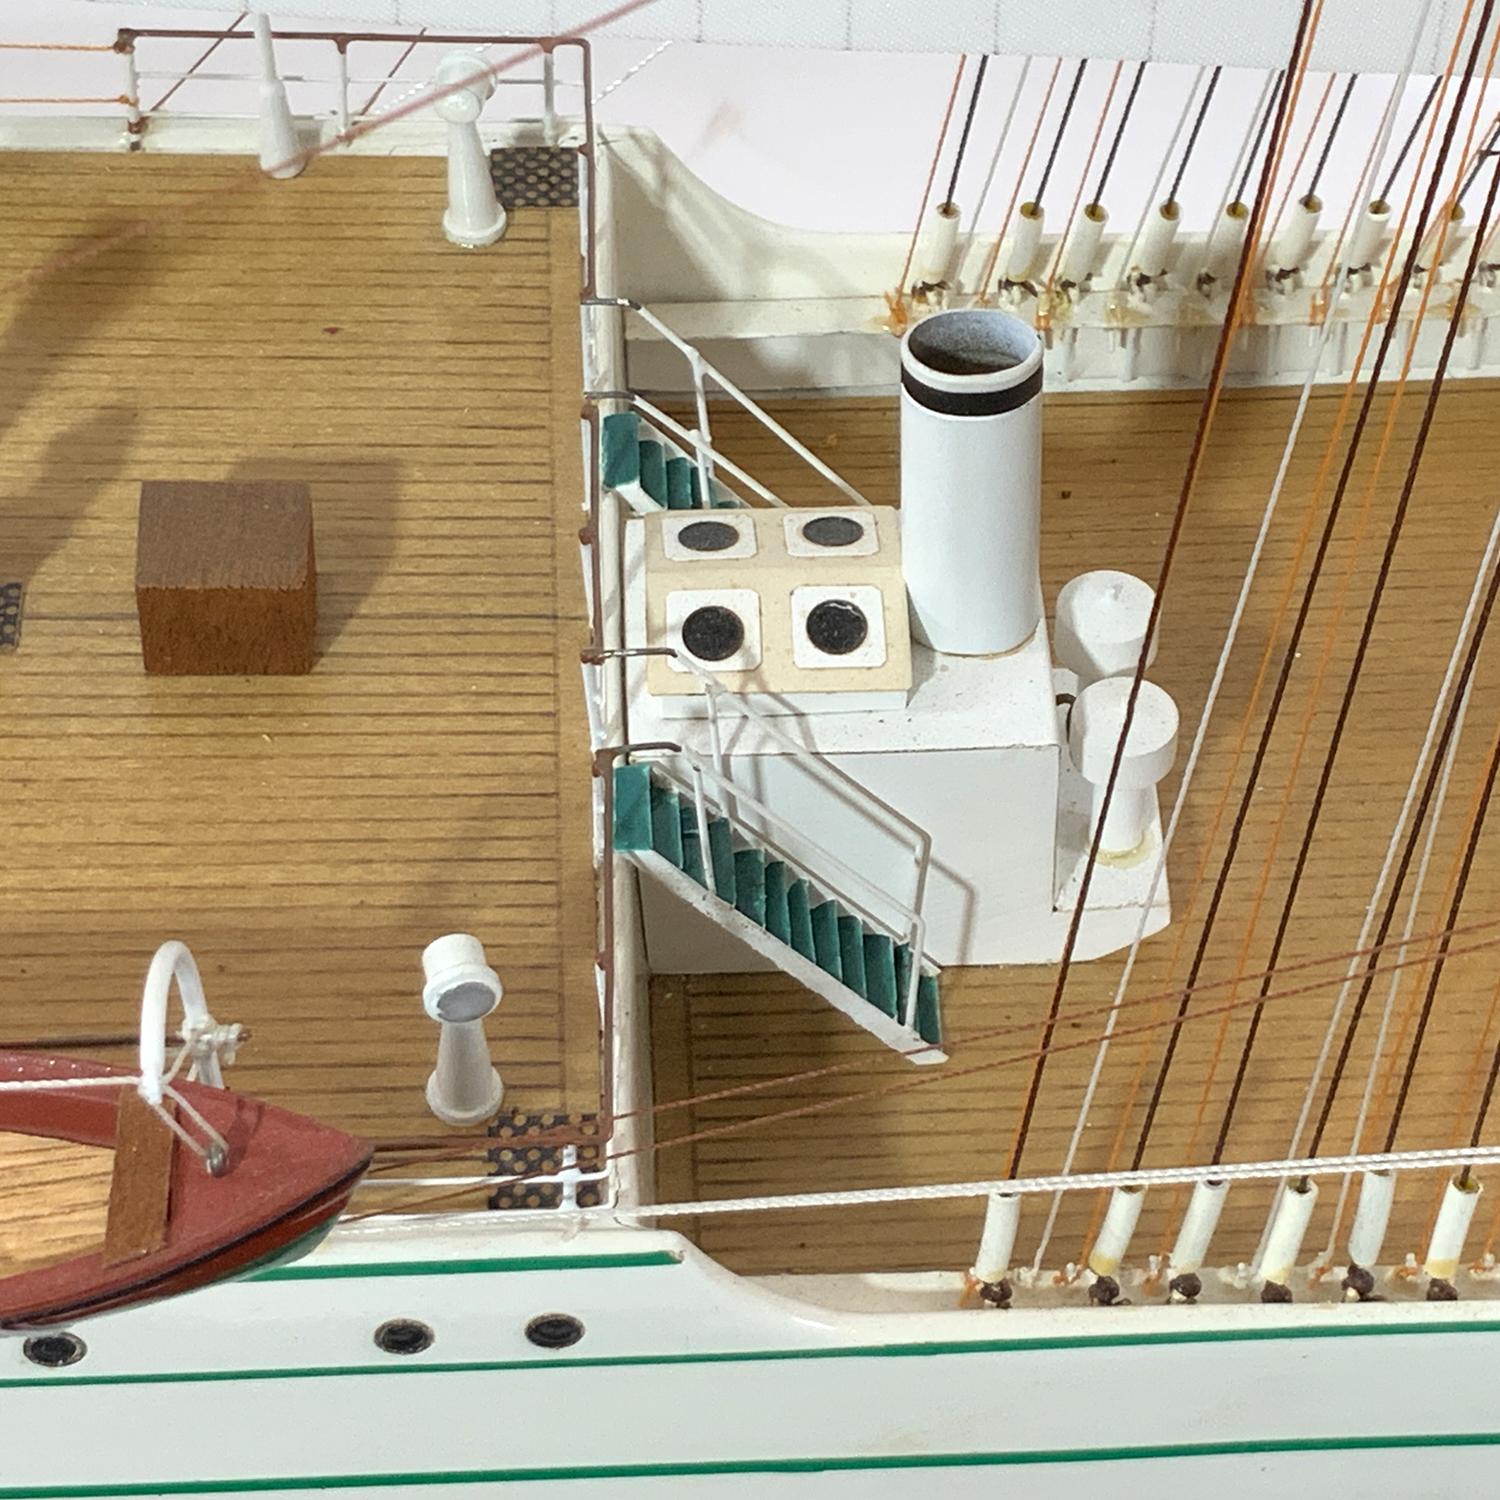 Museum Quality Model Of The Mexican Tall Ship 